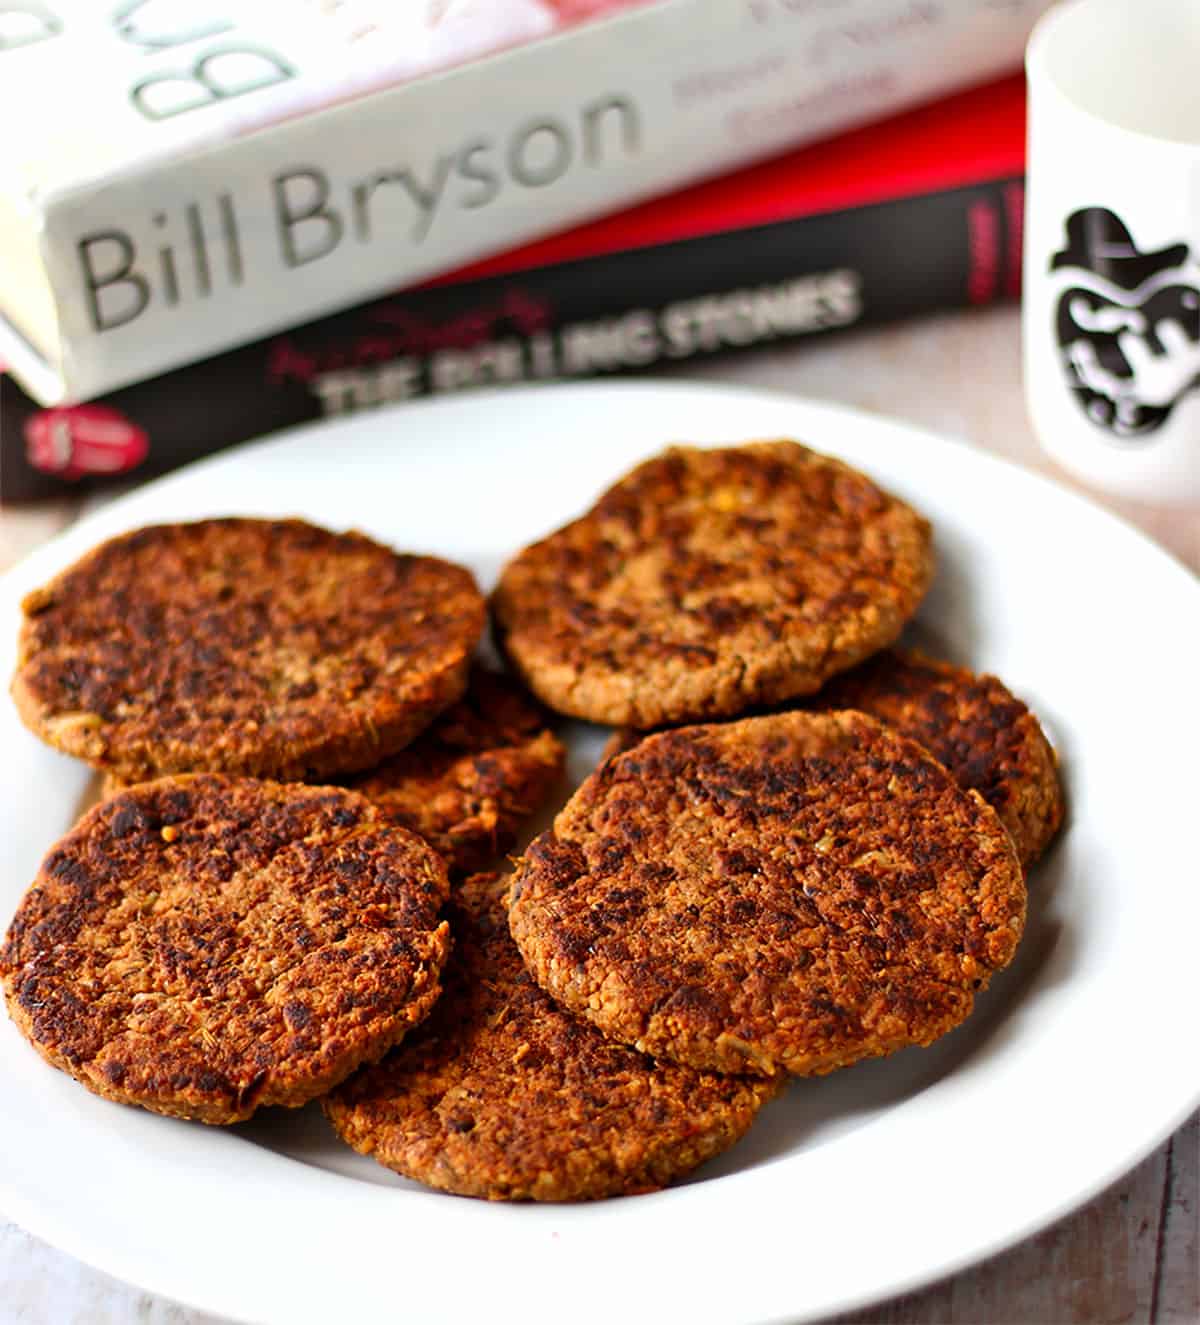 Tempeh sausage patties are stacked on a white plate.